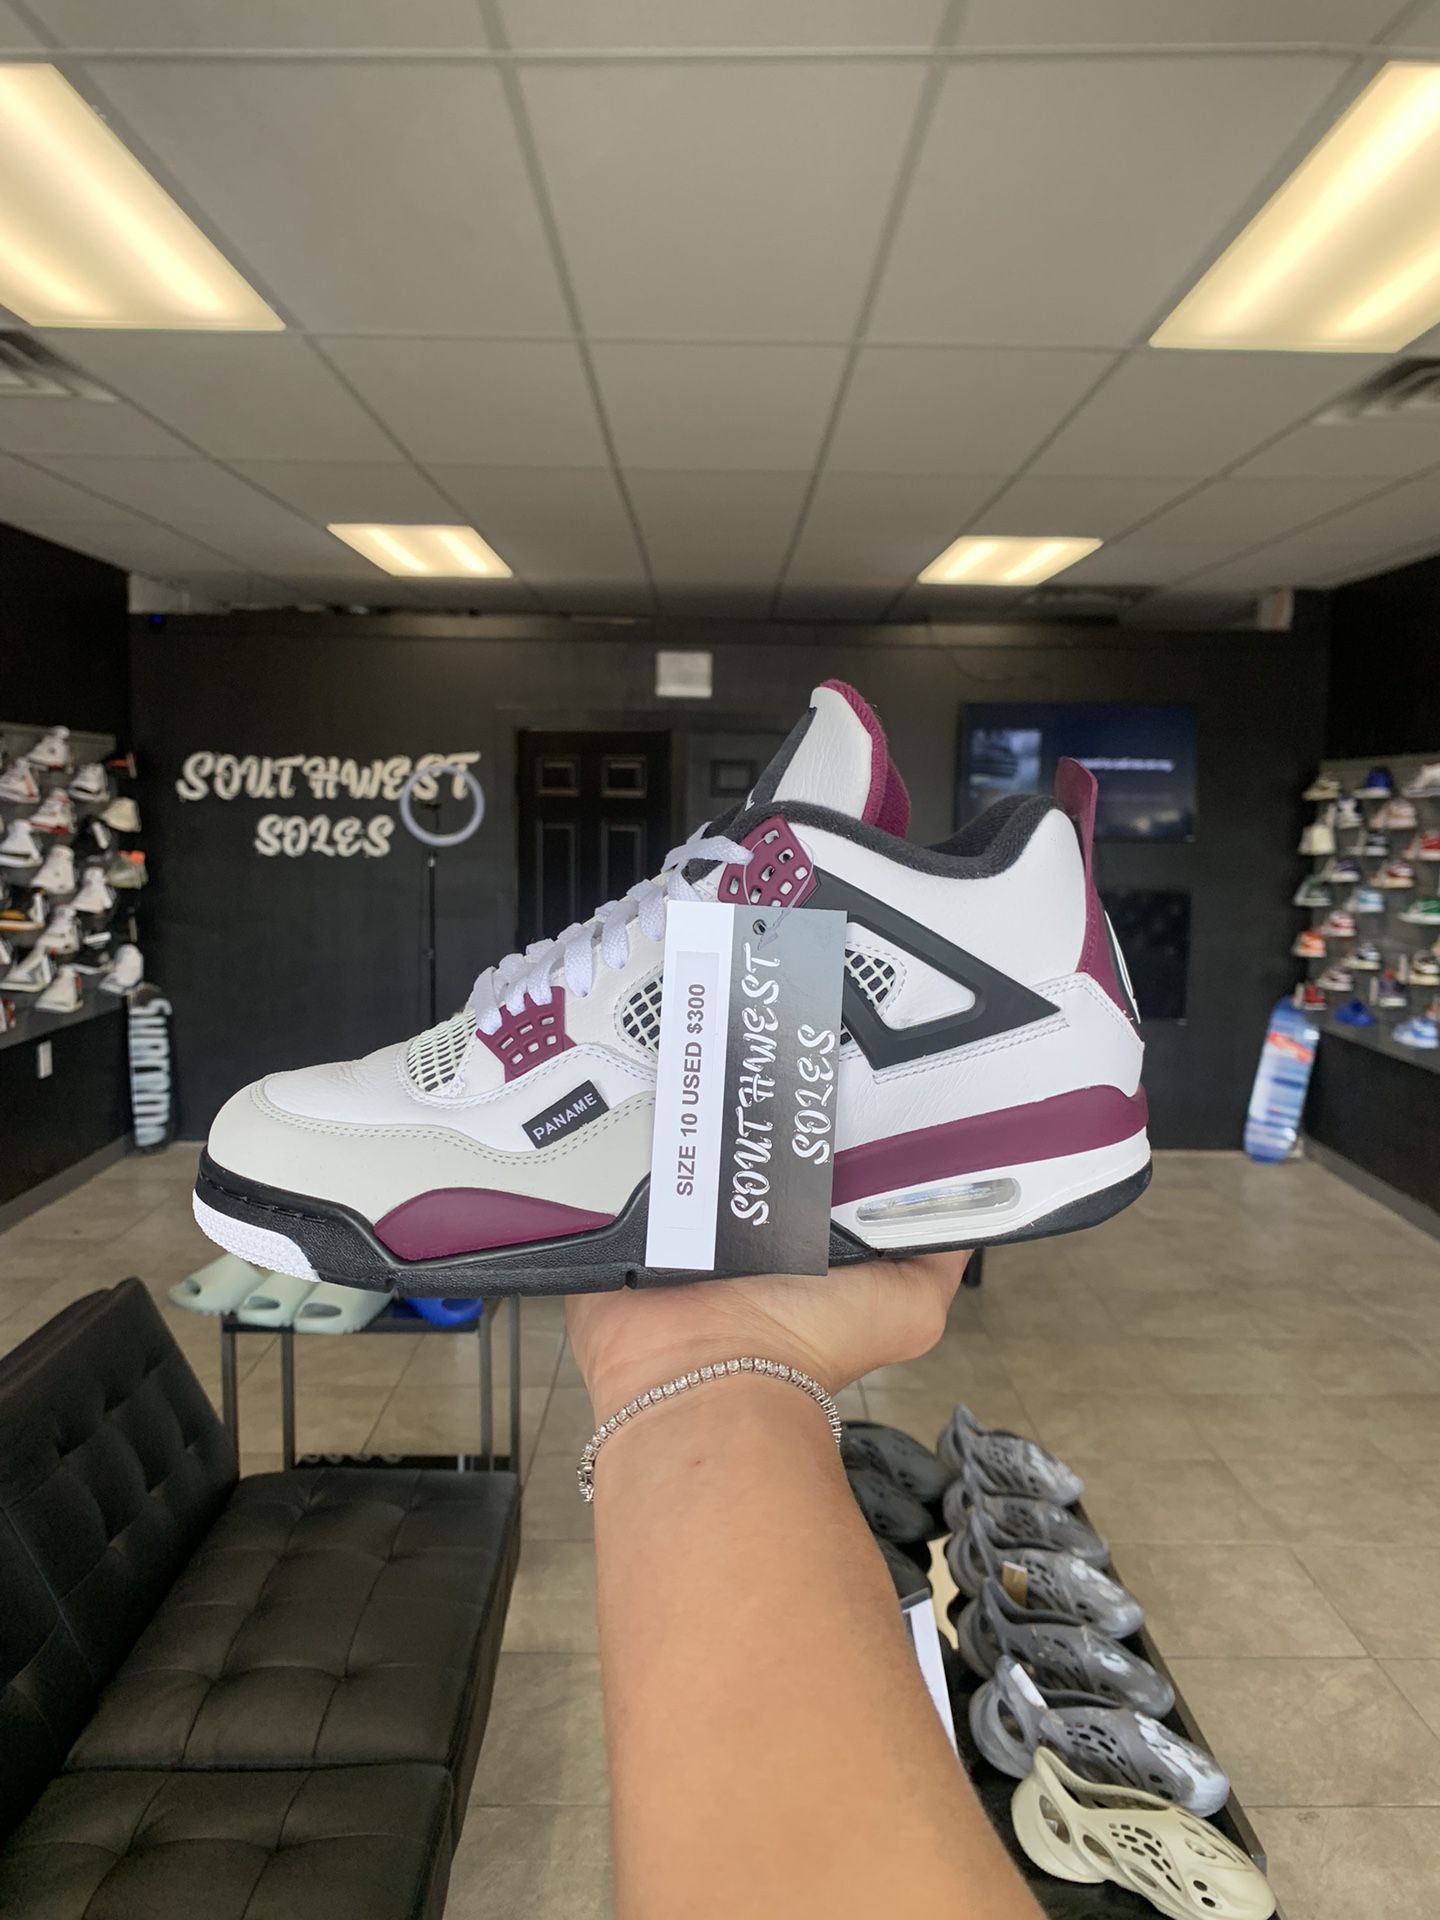 Jordan 4 PSG Size 10 Available In Store!